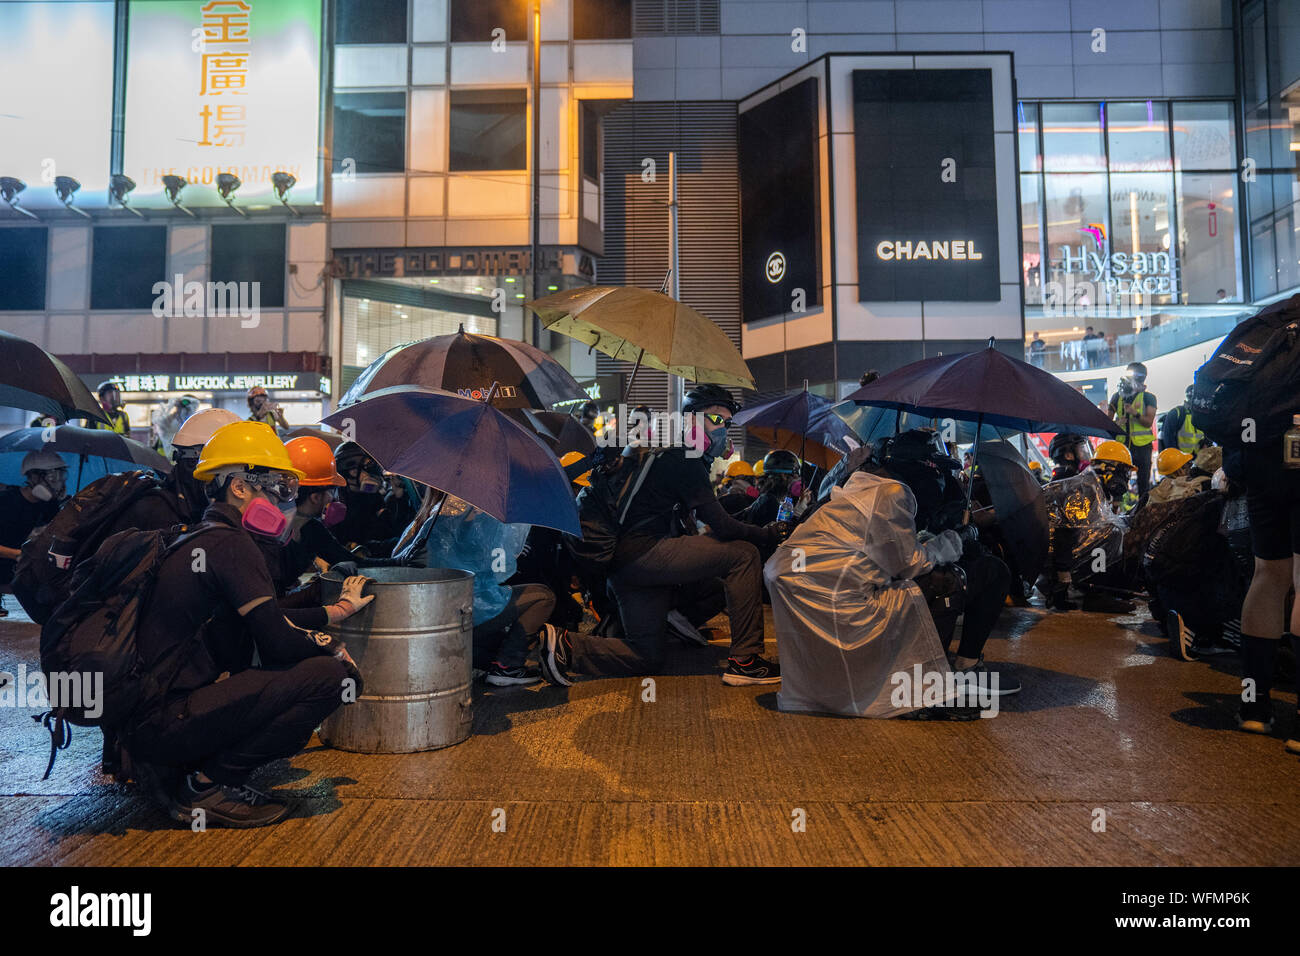 Protesters occupy a road during the demonstration.Unrest in Hong Kong continues as thousands of protesters took part in a illegal anti government demonstration. Petrol bombs has been thrown by the protesters and the police fired multiple rounds of rubber bullets towards the protesters. Stock Photo